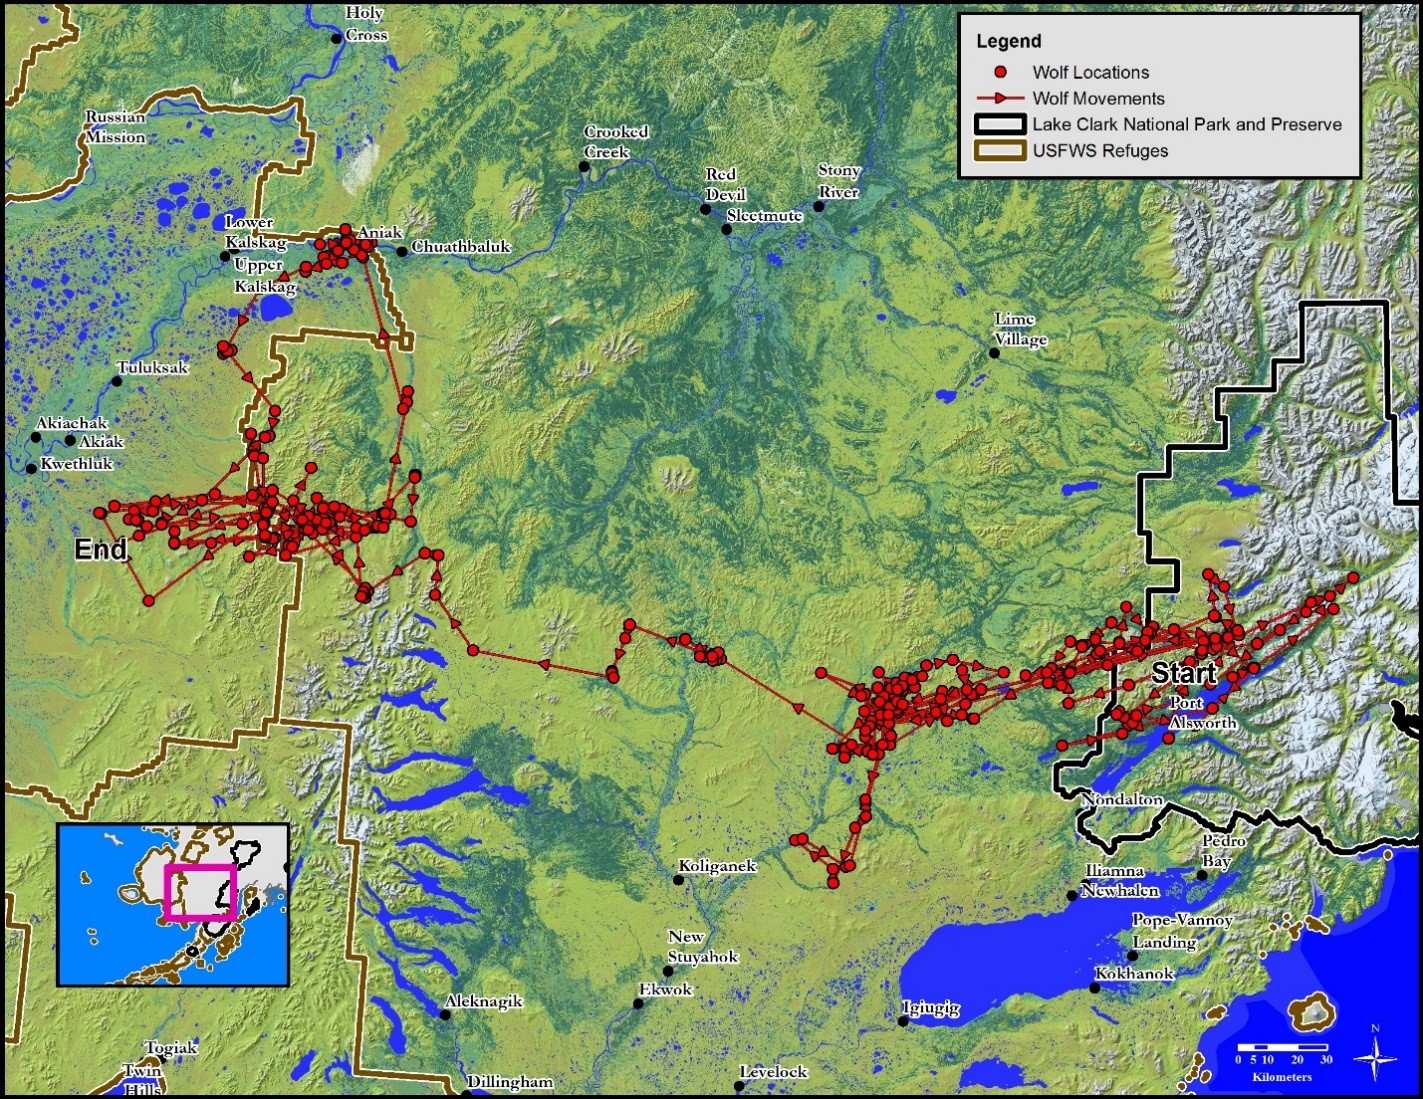 A map showing various wolf locations in Southwest Alaska